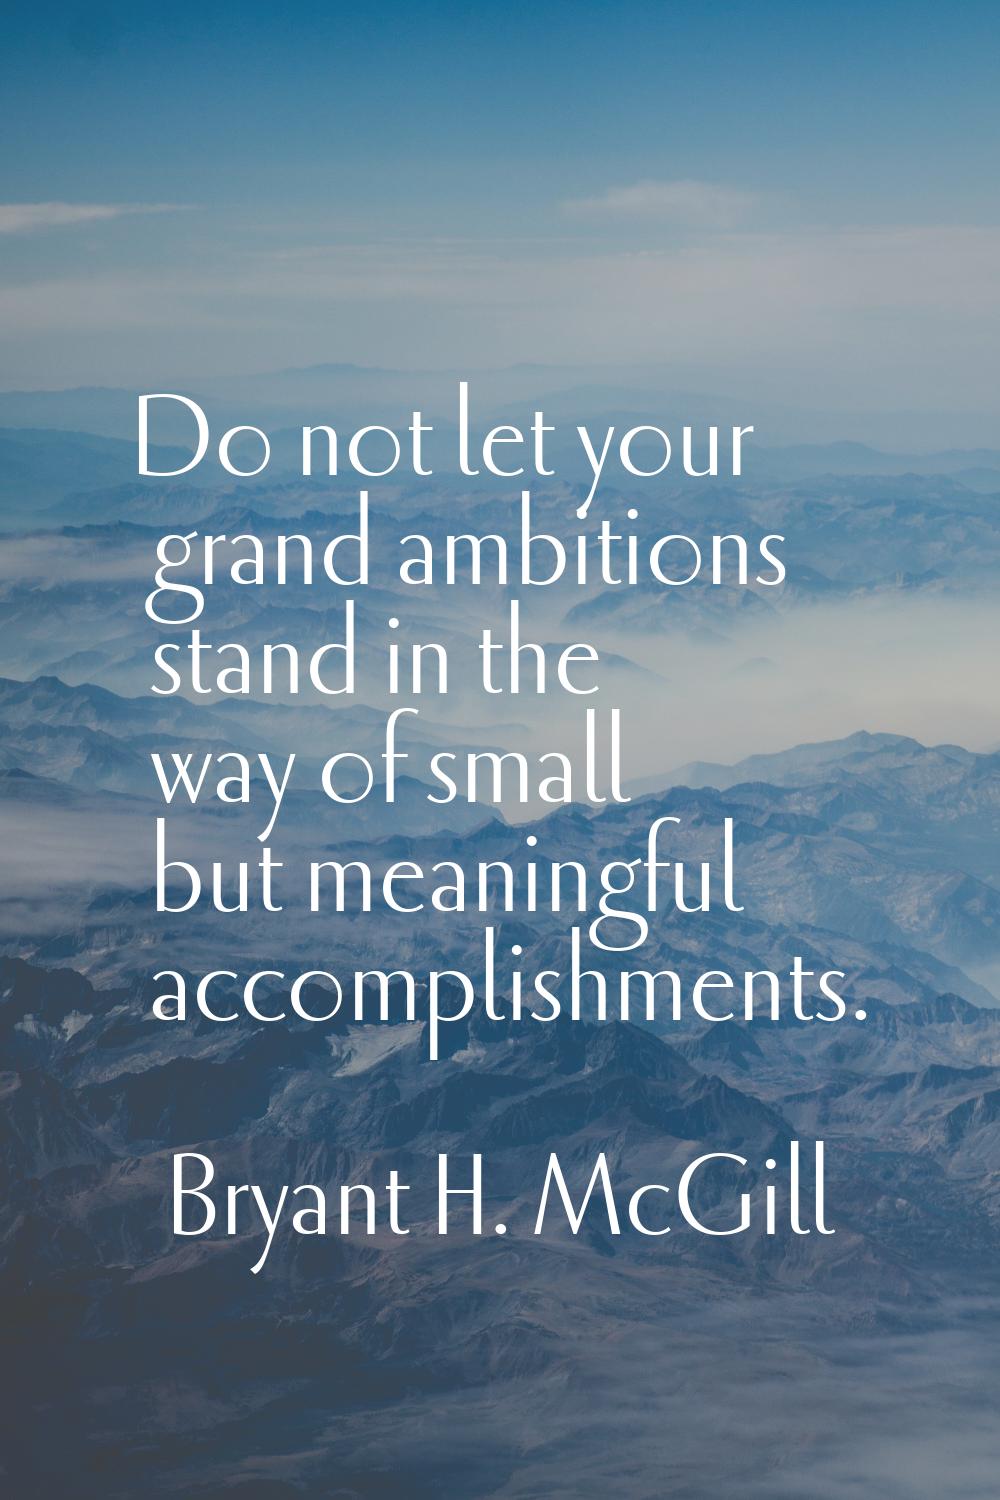 Do not let your grand ambitions stand in the way of small but meaningful accomplishments.